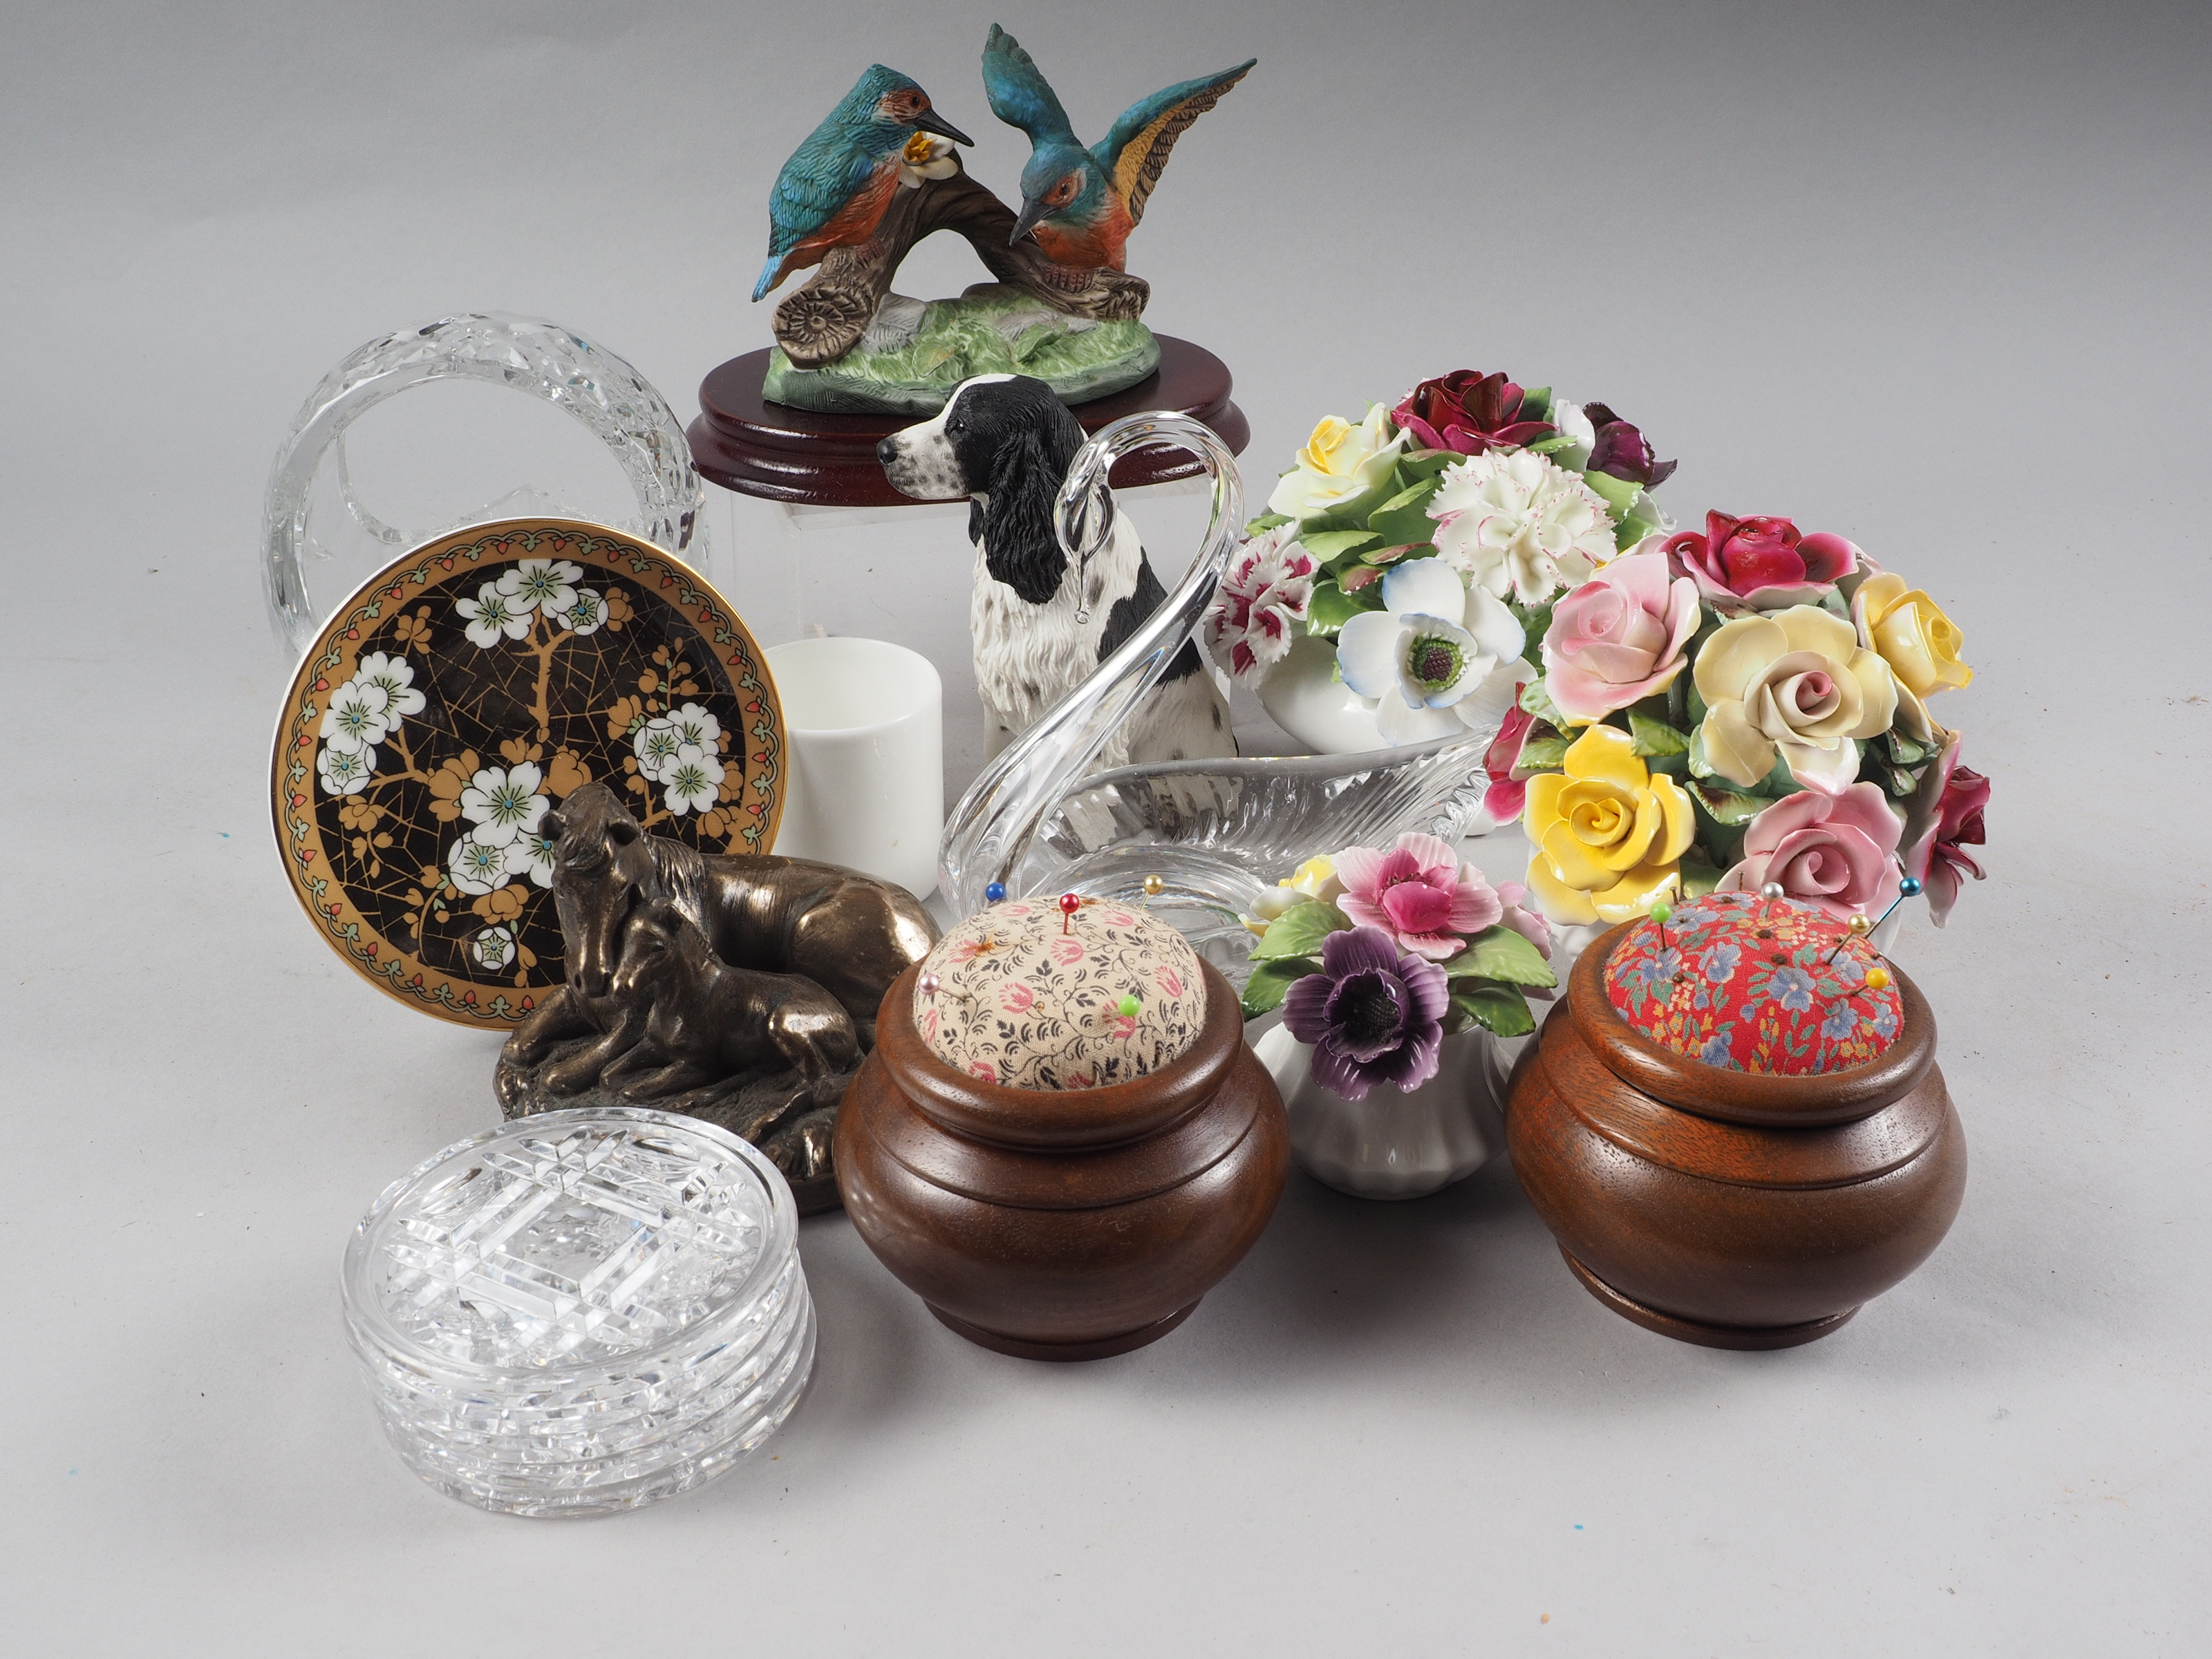 A Royal Doulton ceramic floral display, two other floral displays, two pin cushions, a glass